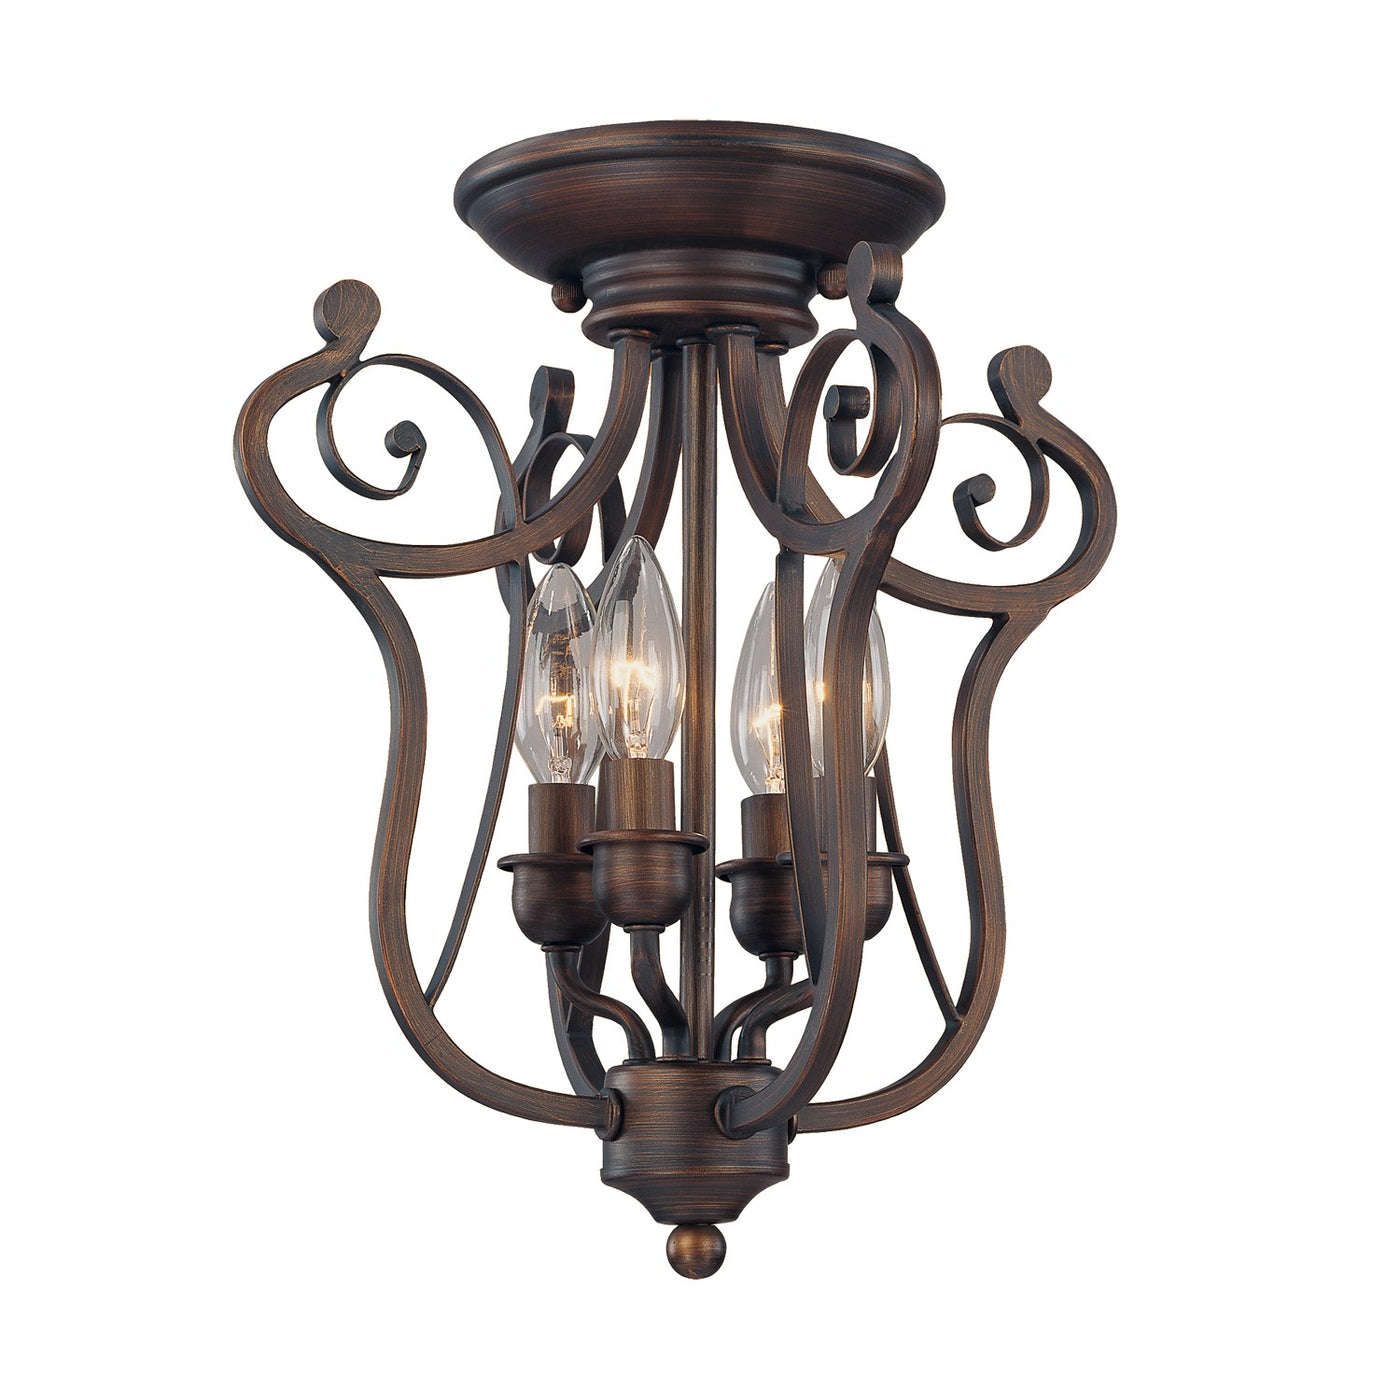 Millennium Lightings Chateau Semi-Flush Offered in Rubbed Bronze finish, Item Number 1144-RBZ